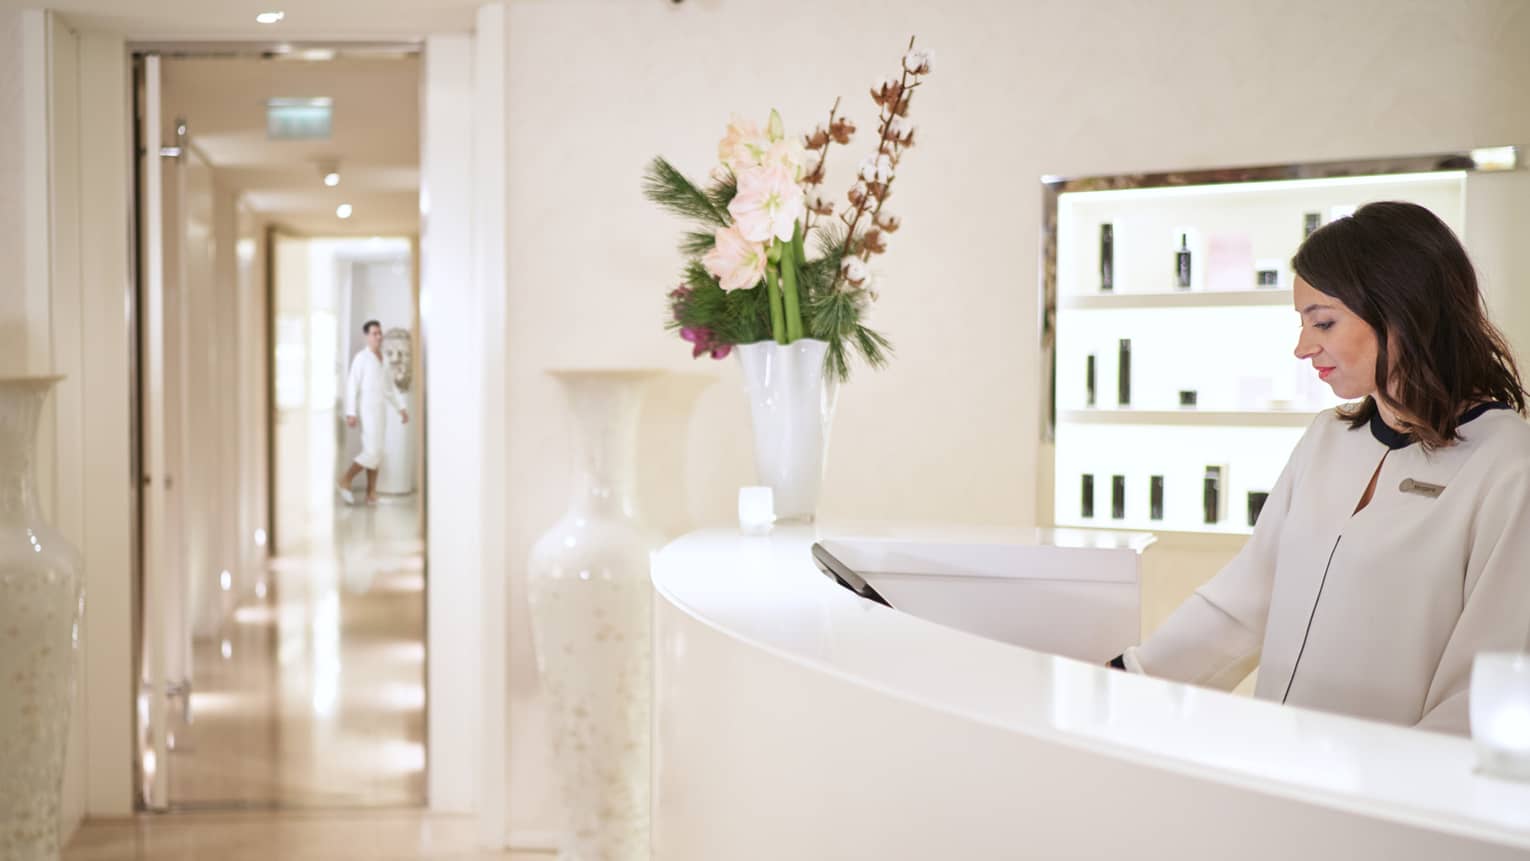 Staff member in white jacket standing behind curved white reception desk with flower vase, view into spa hallway